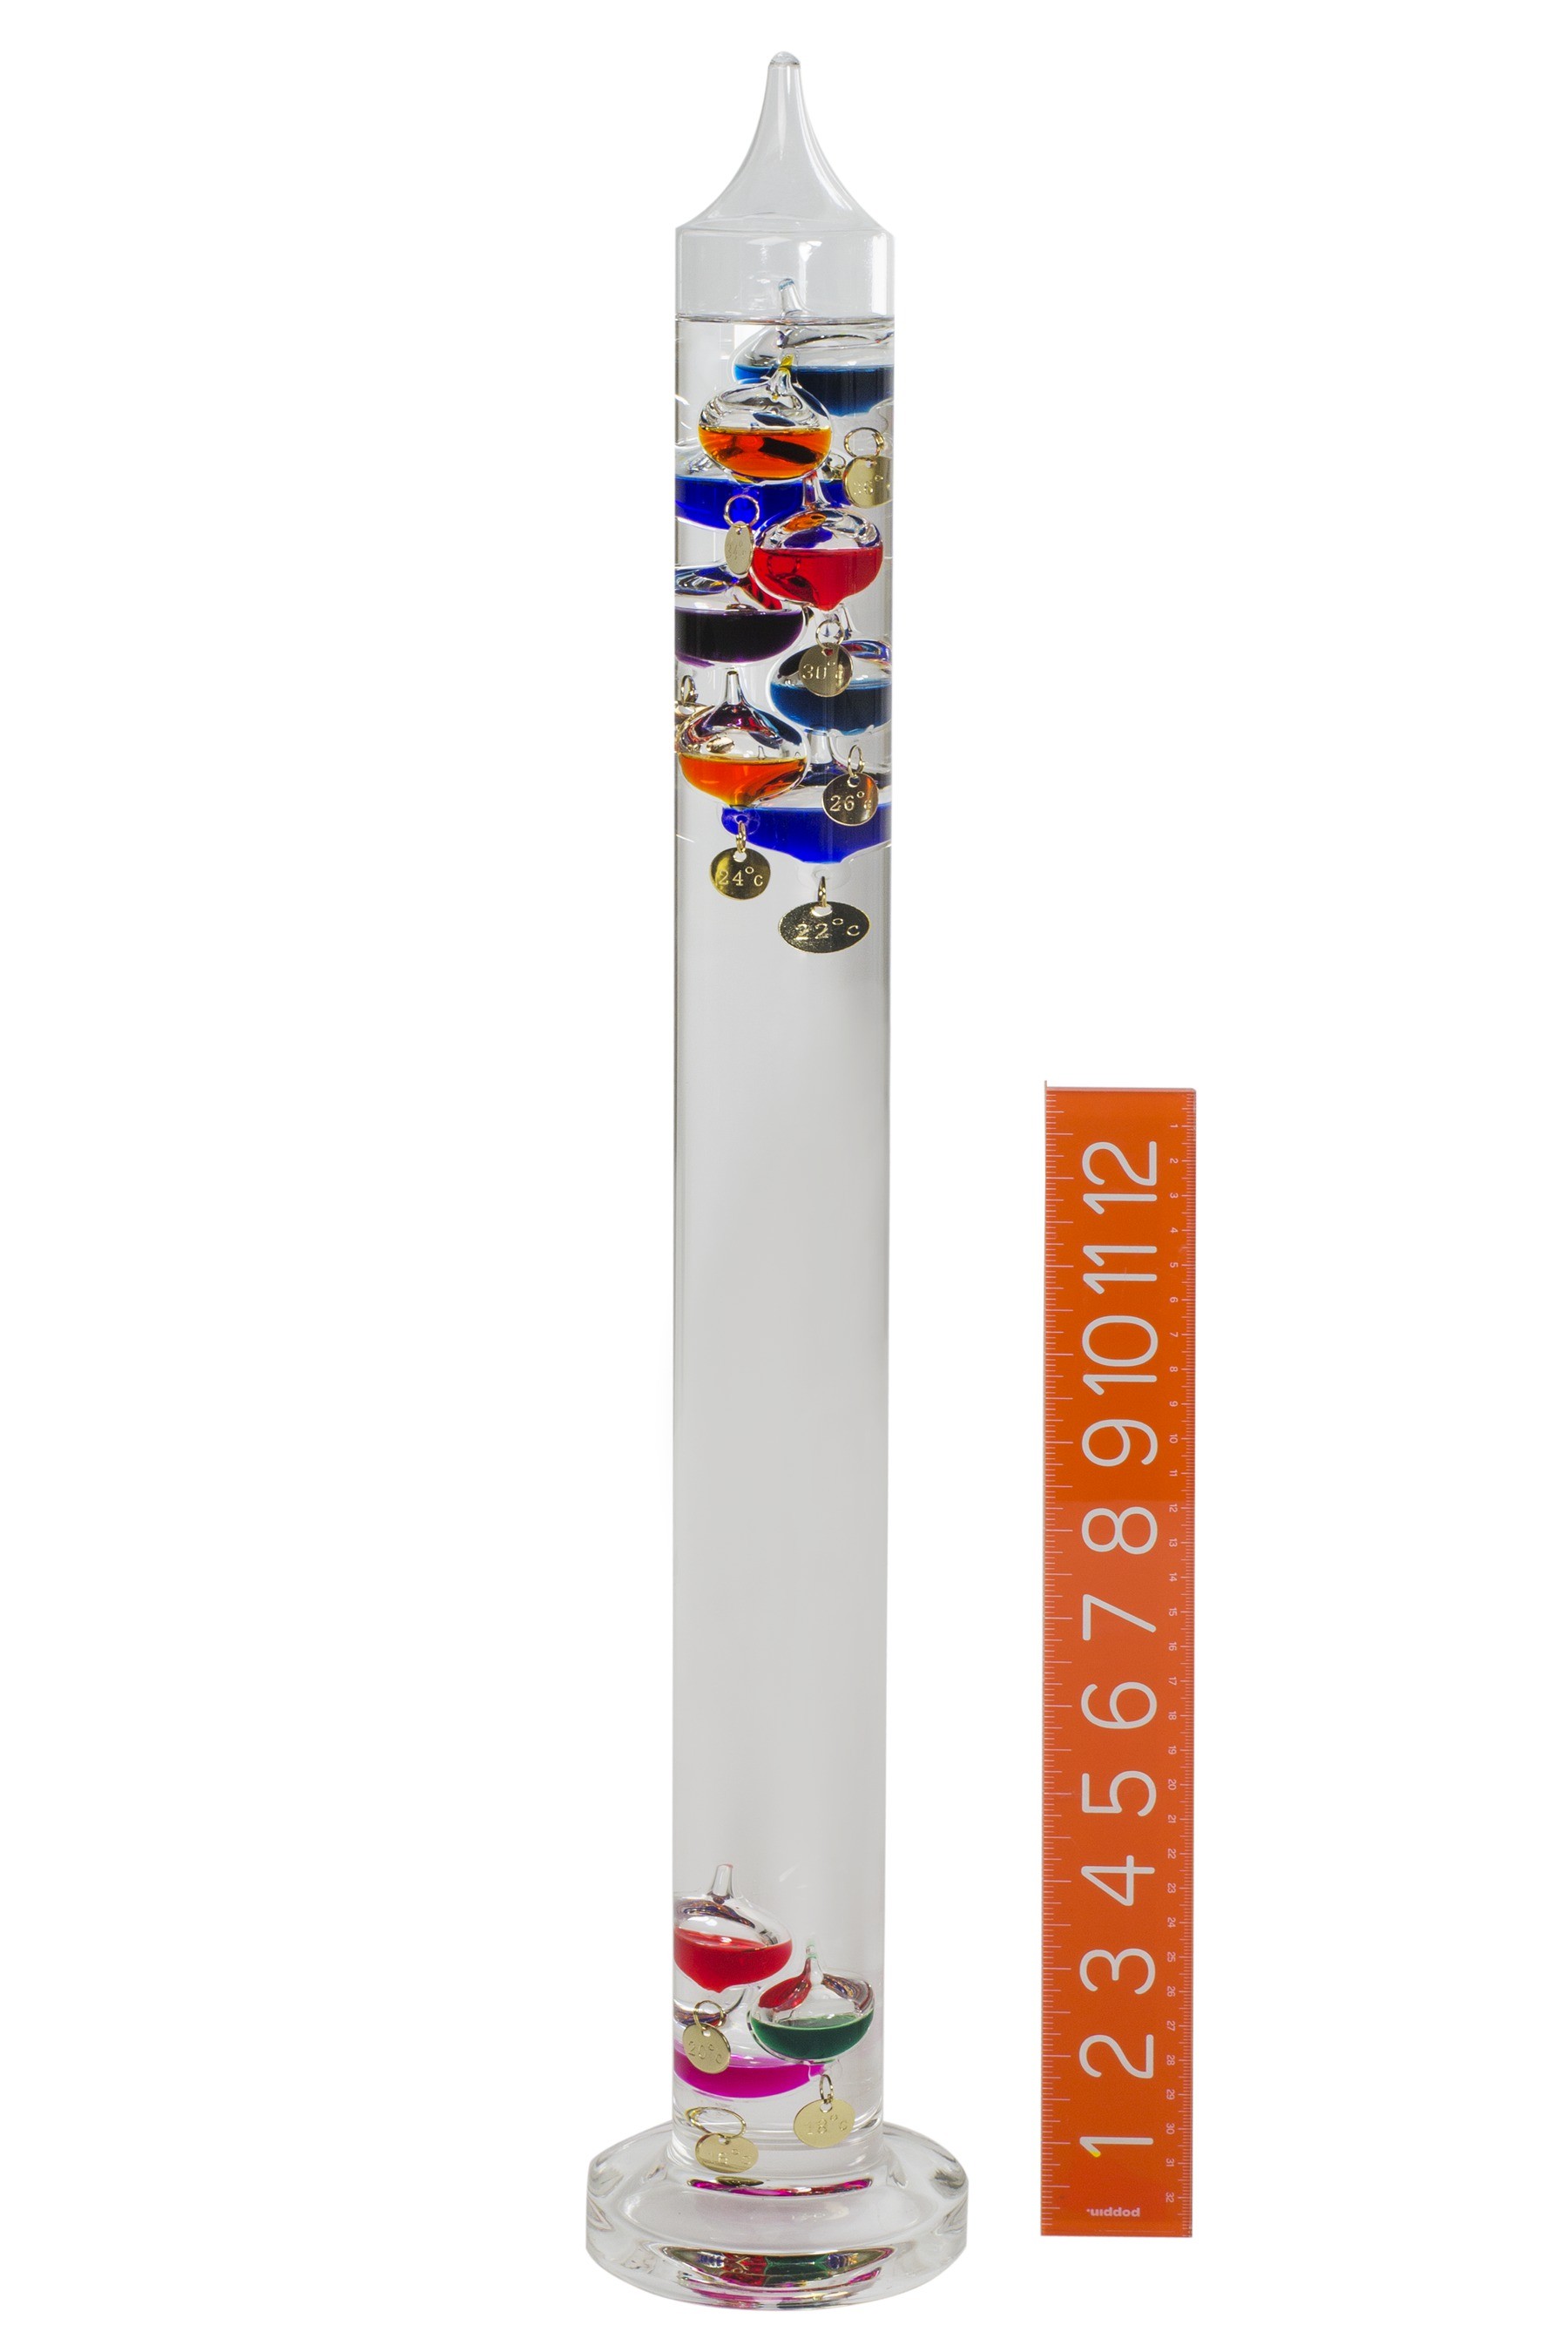 SP Bel-Art, H-B DURAC Galileo Thermometer; 16 to 36C, 11 Spheres, 610mm